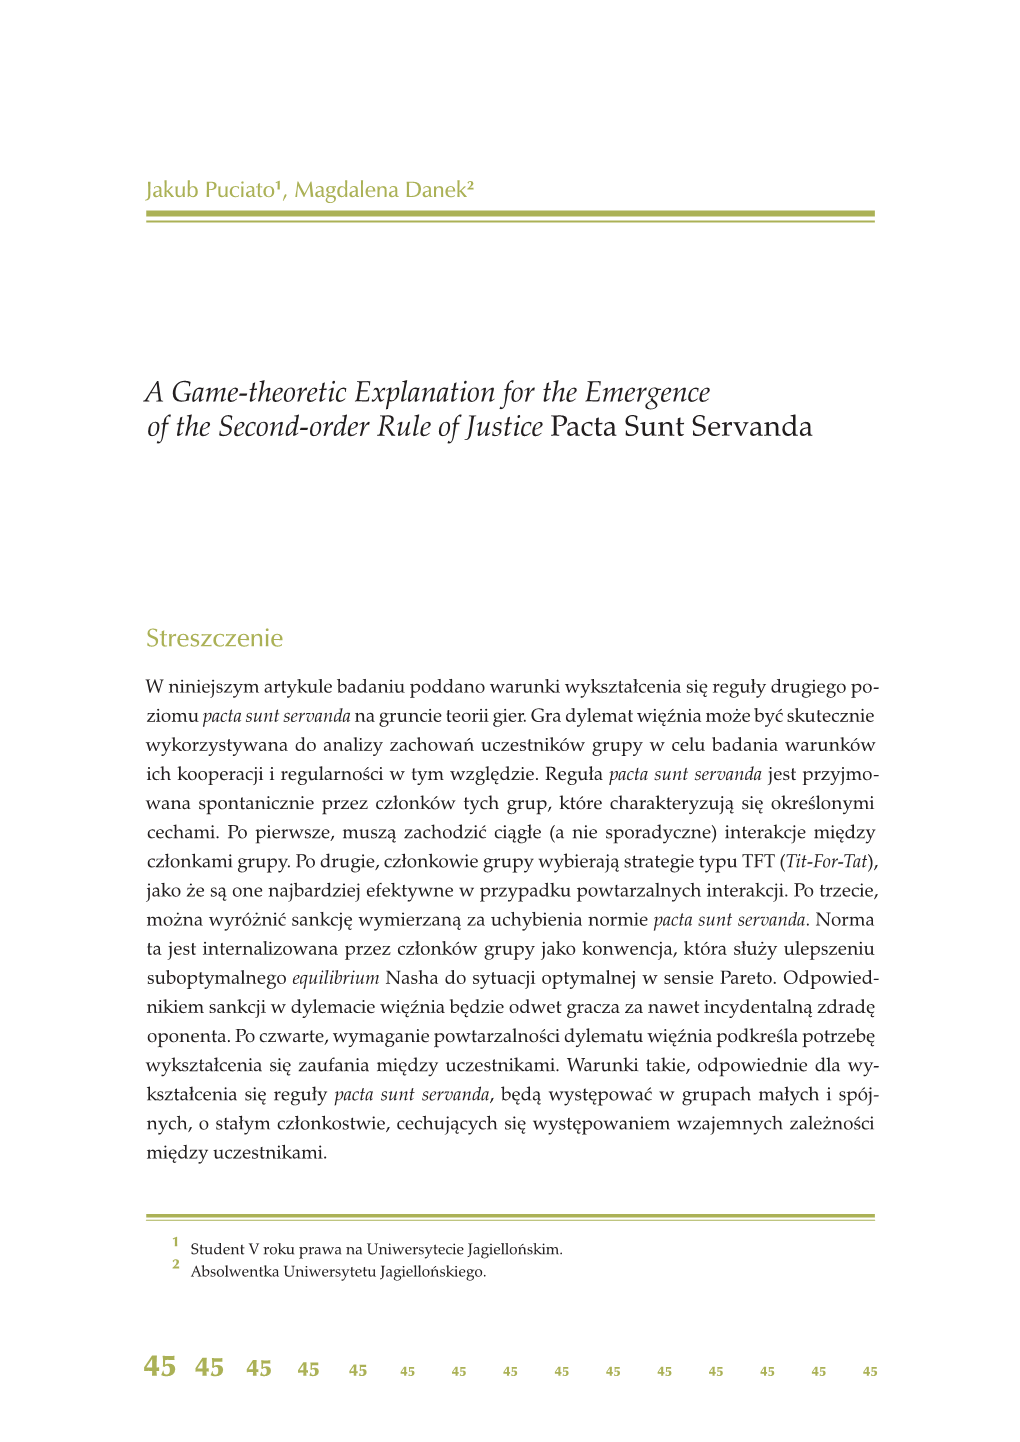 A Game-Theoretic Explanation for the Emergence of the Second-Order Rule of Justice Pacta Sunt Servanda